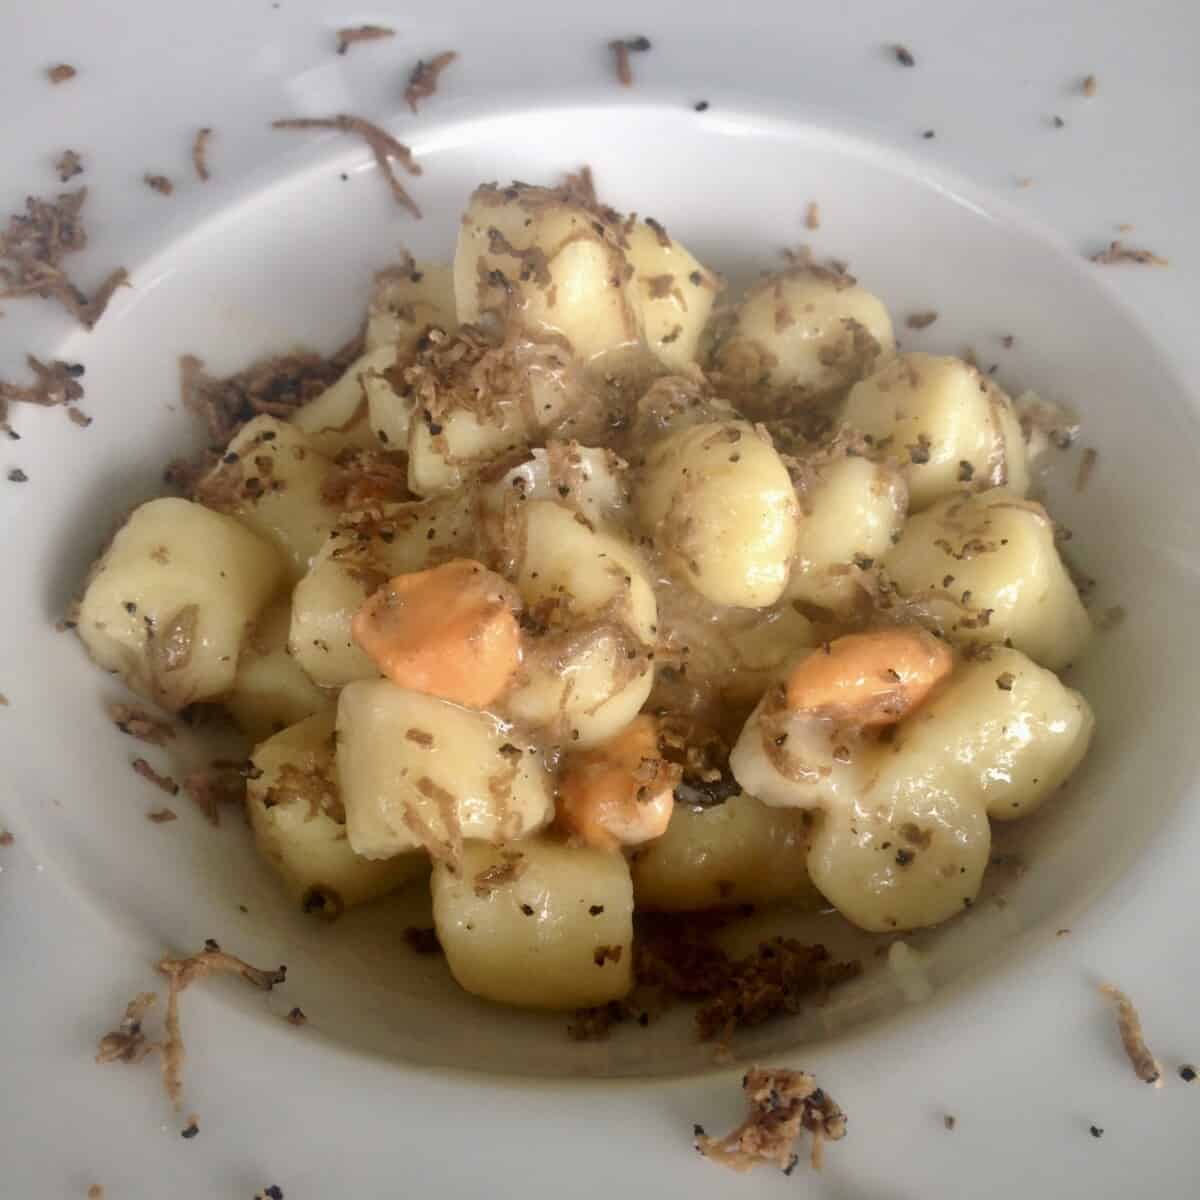 Gnocchi with scallops and truffles we ate from a restaurant here in Northeast Italy.